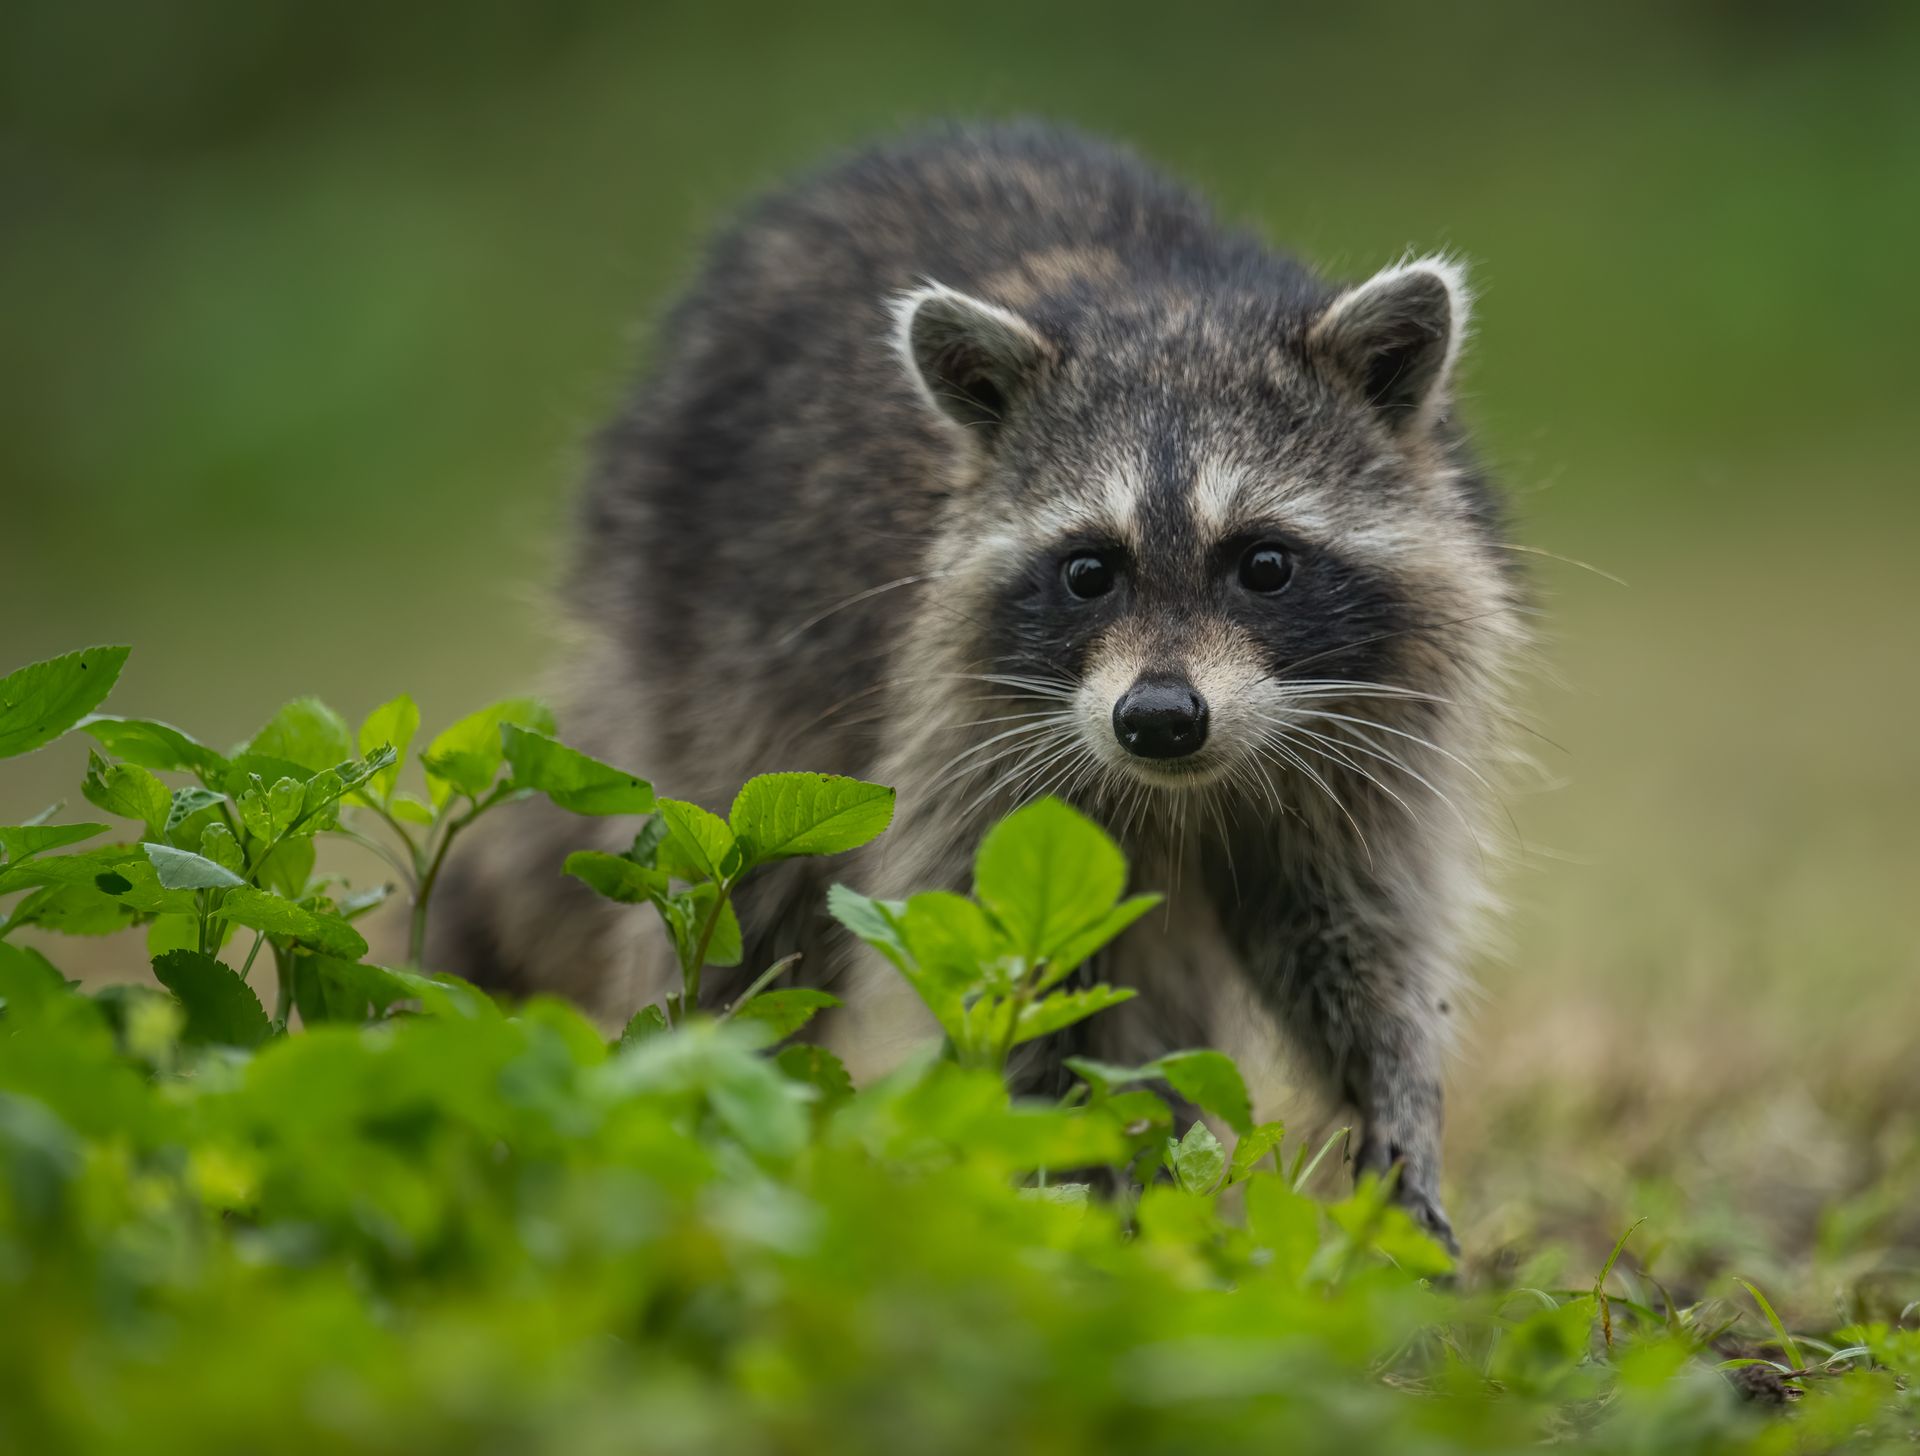 A raccoon is standing in the grass looking at the camera.